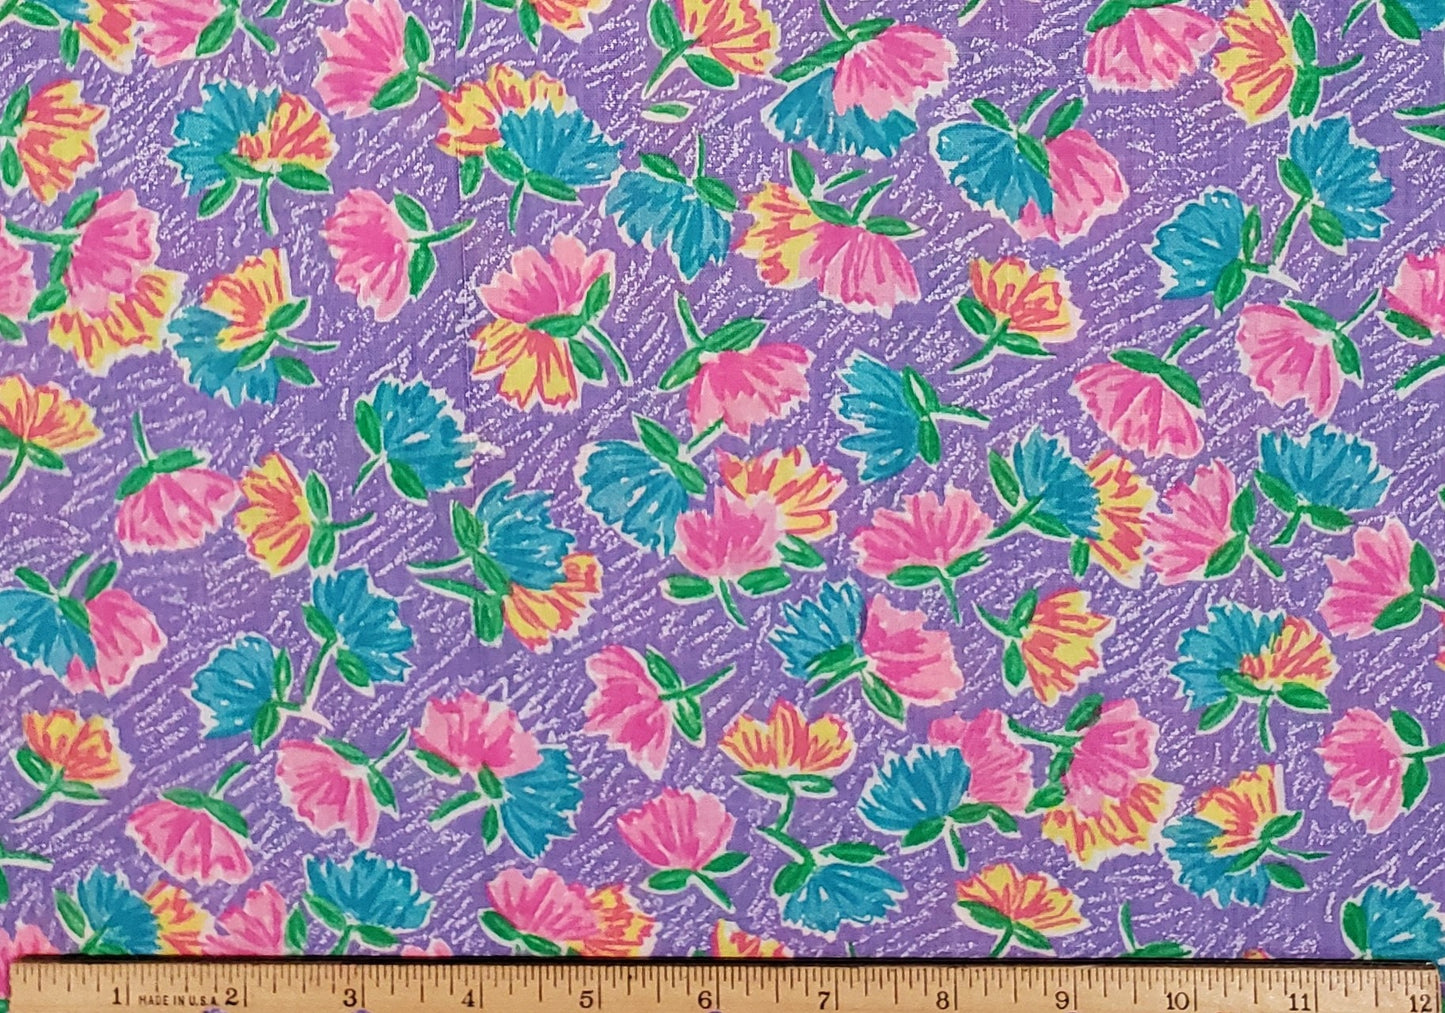 EOB - Purple Patterned Fabric - Light Pink, Blue and Yellow Flower Pattern